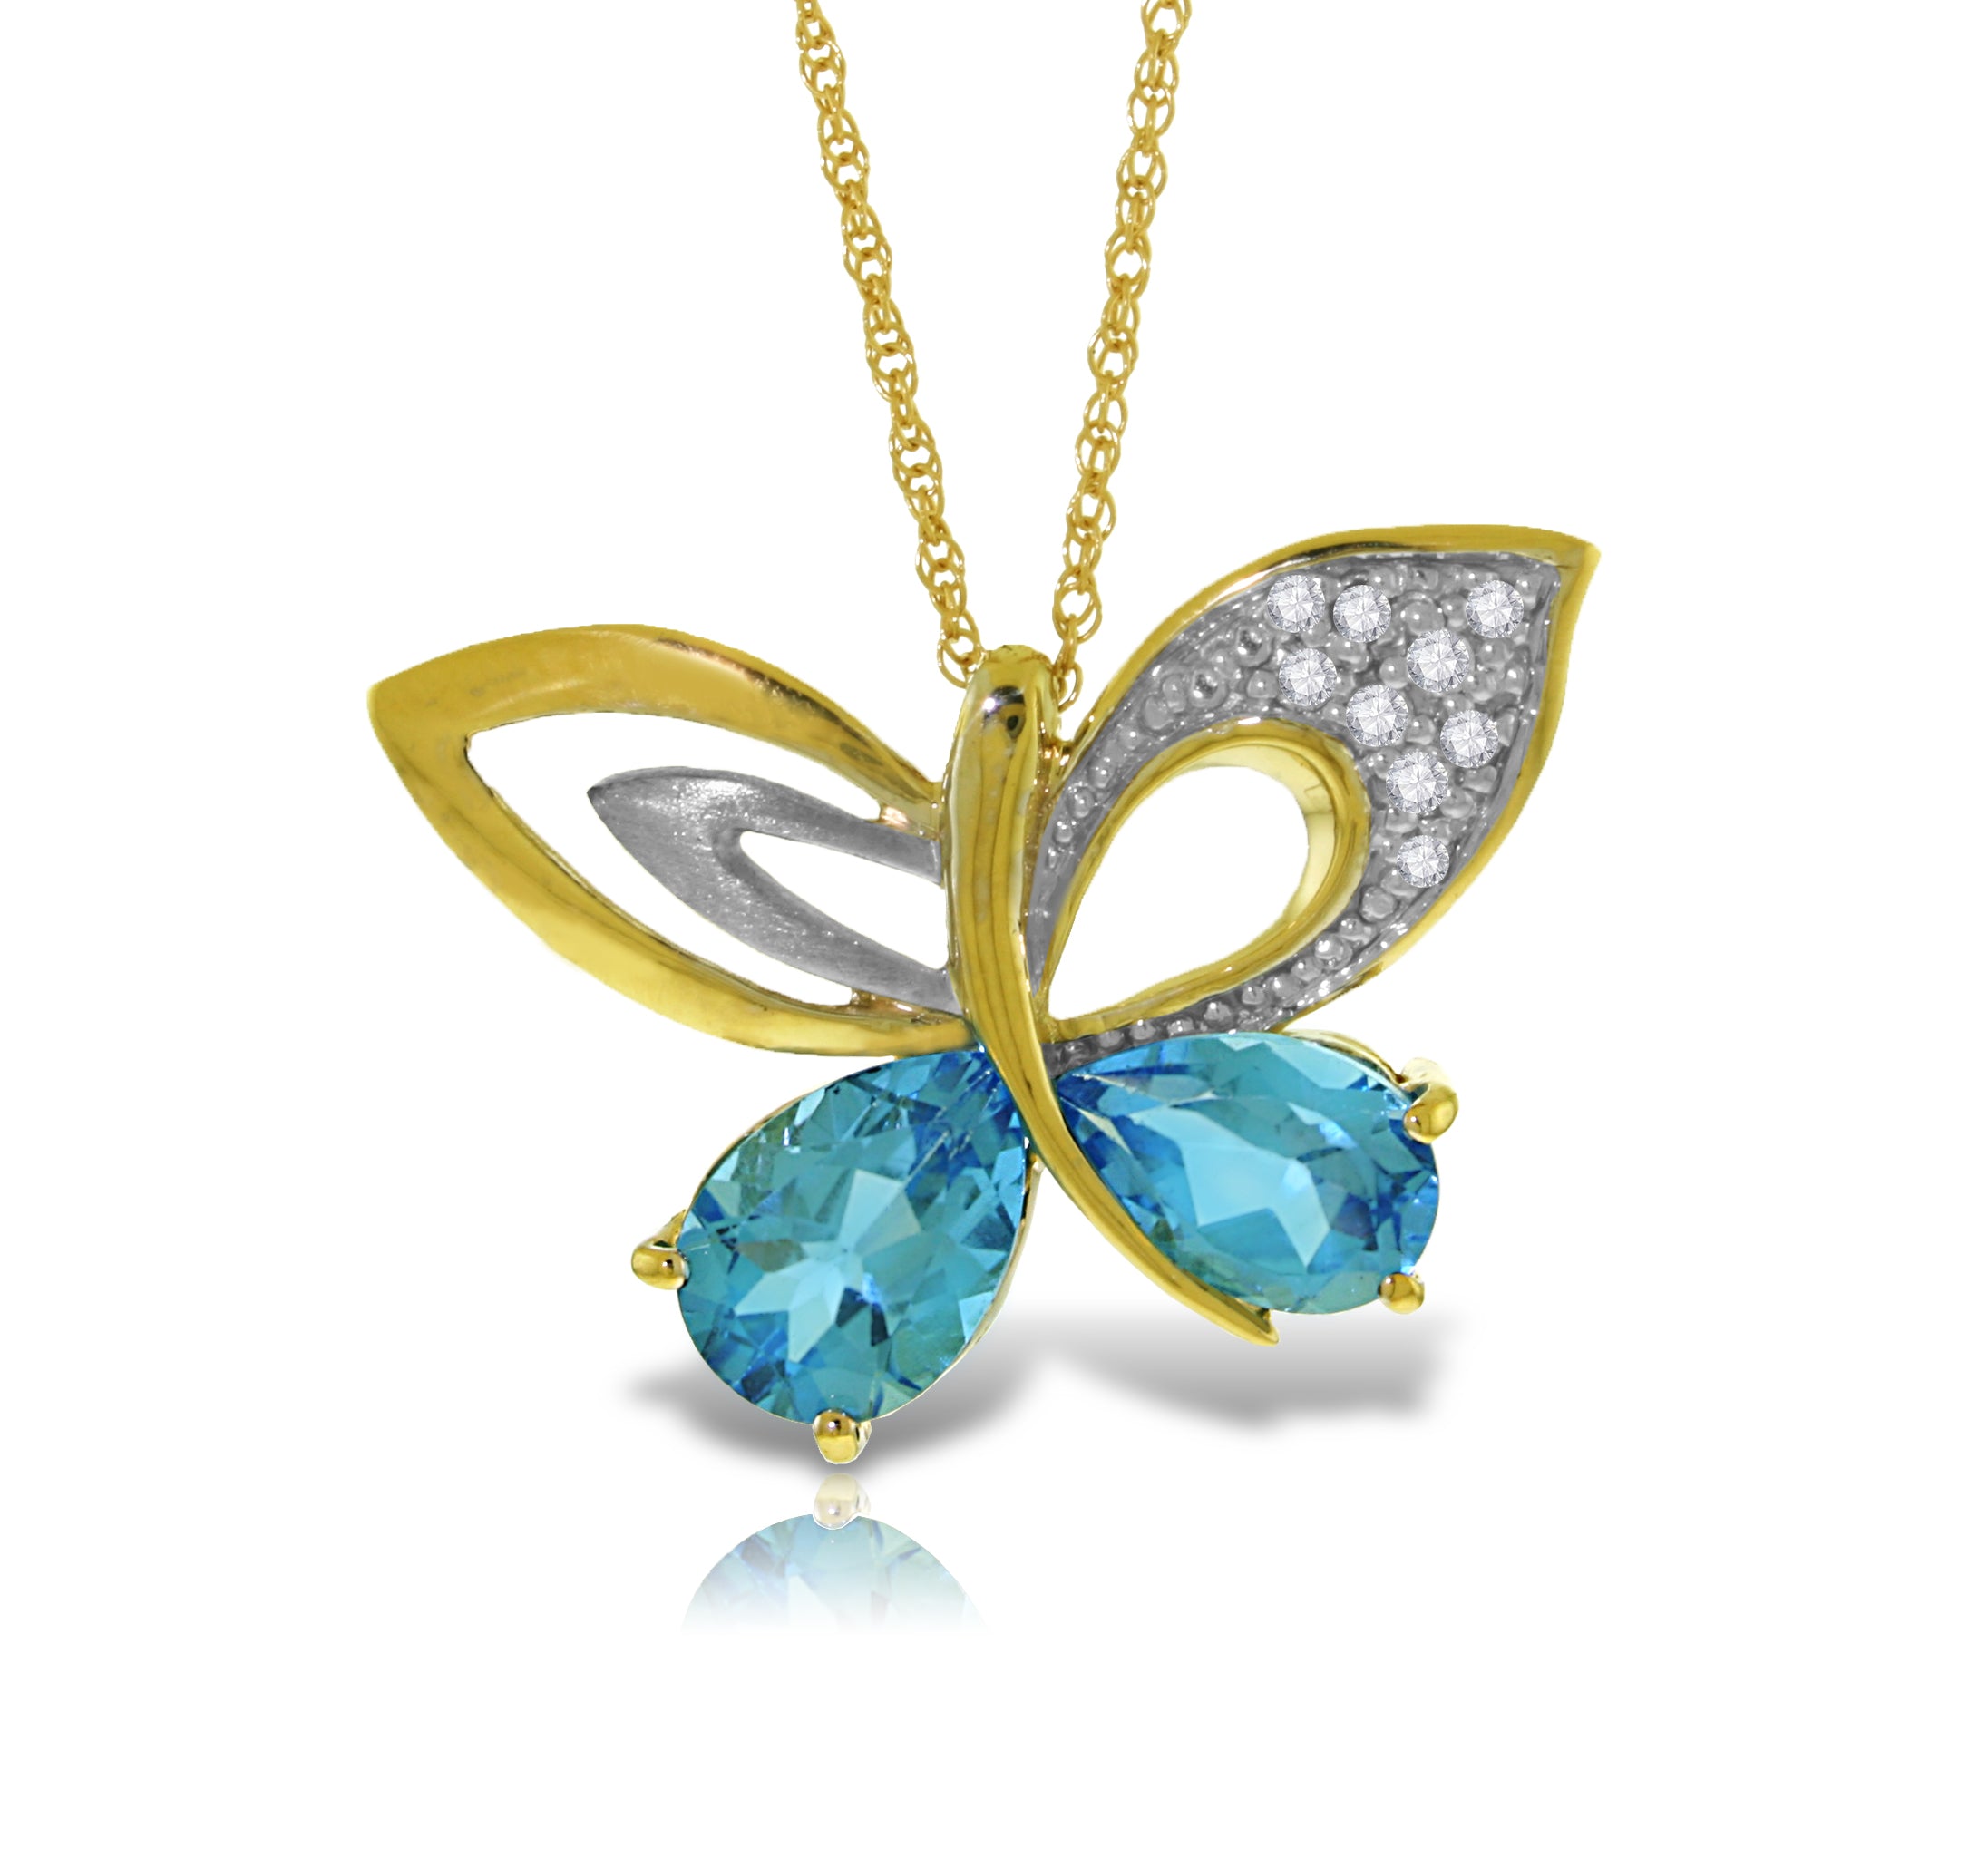 14K Solid Yellow Gold Butterfly Diamond & Blue Topaz Necklace